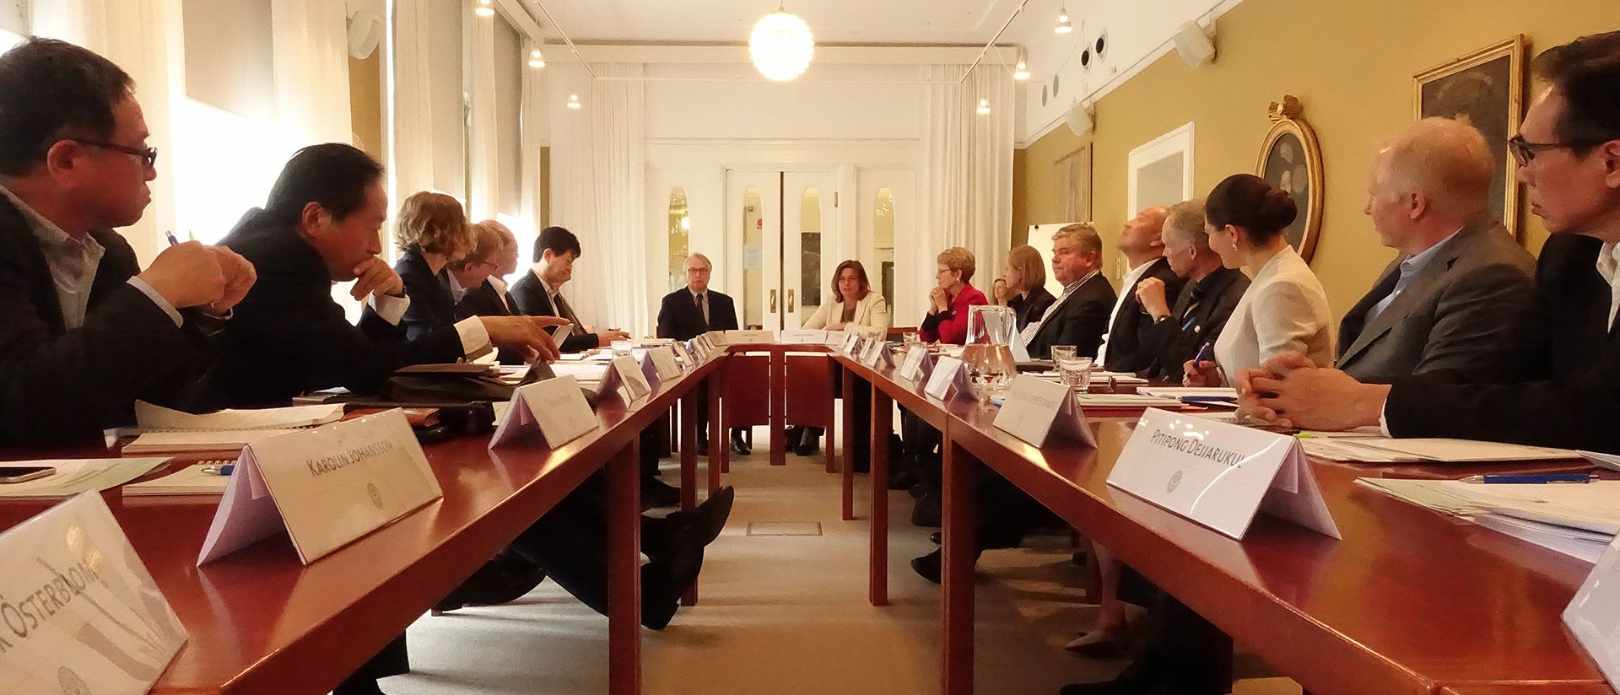 A round-table meeting between scientists, business leaders and HRH Crown Princess Victoria of Sweden.